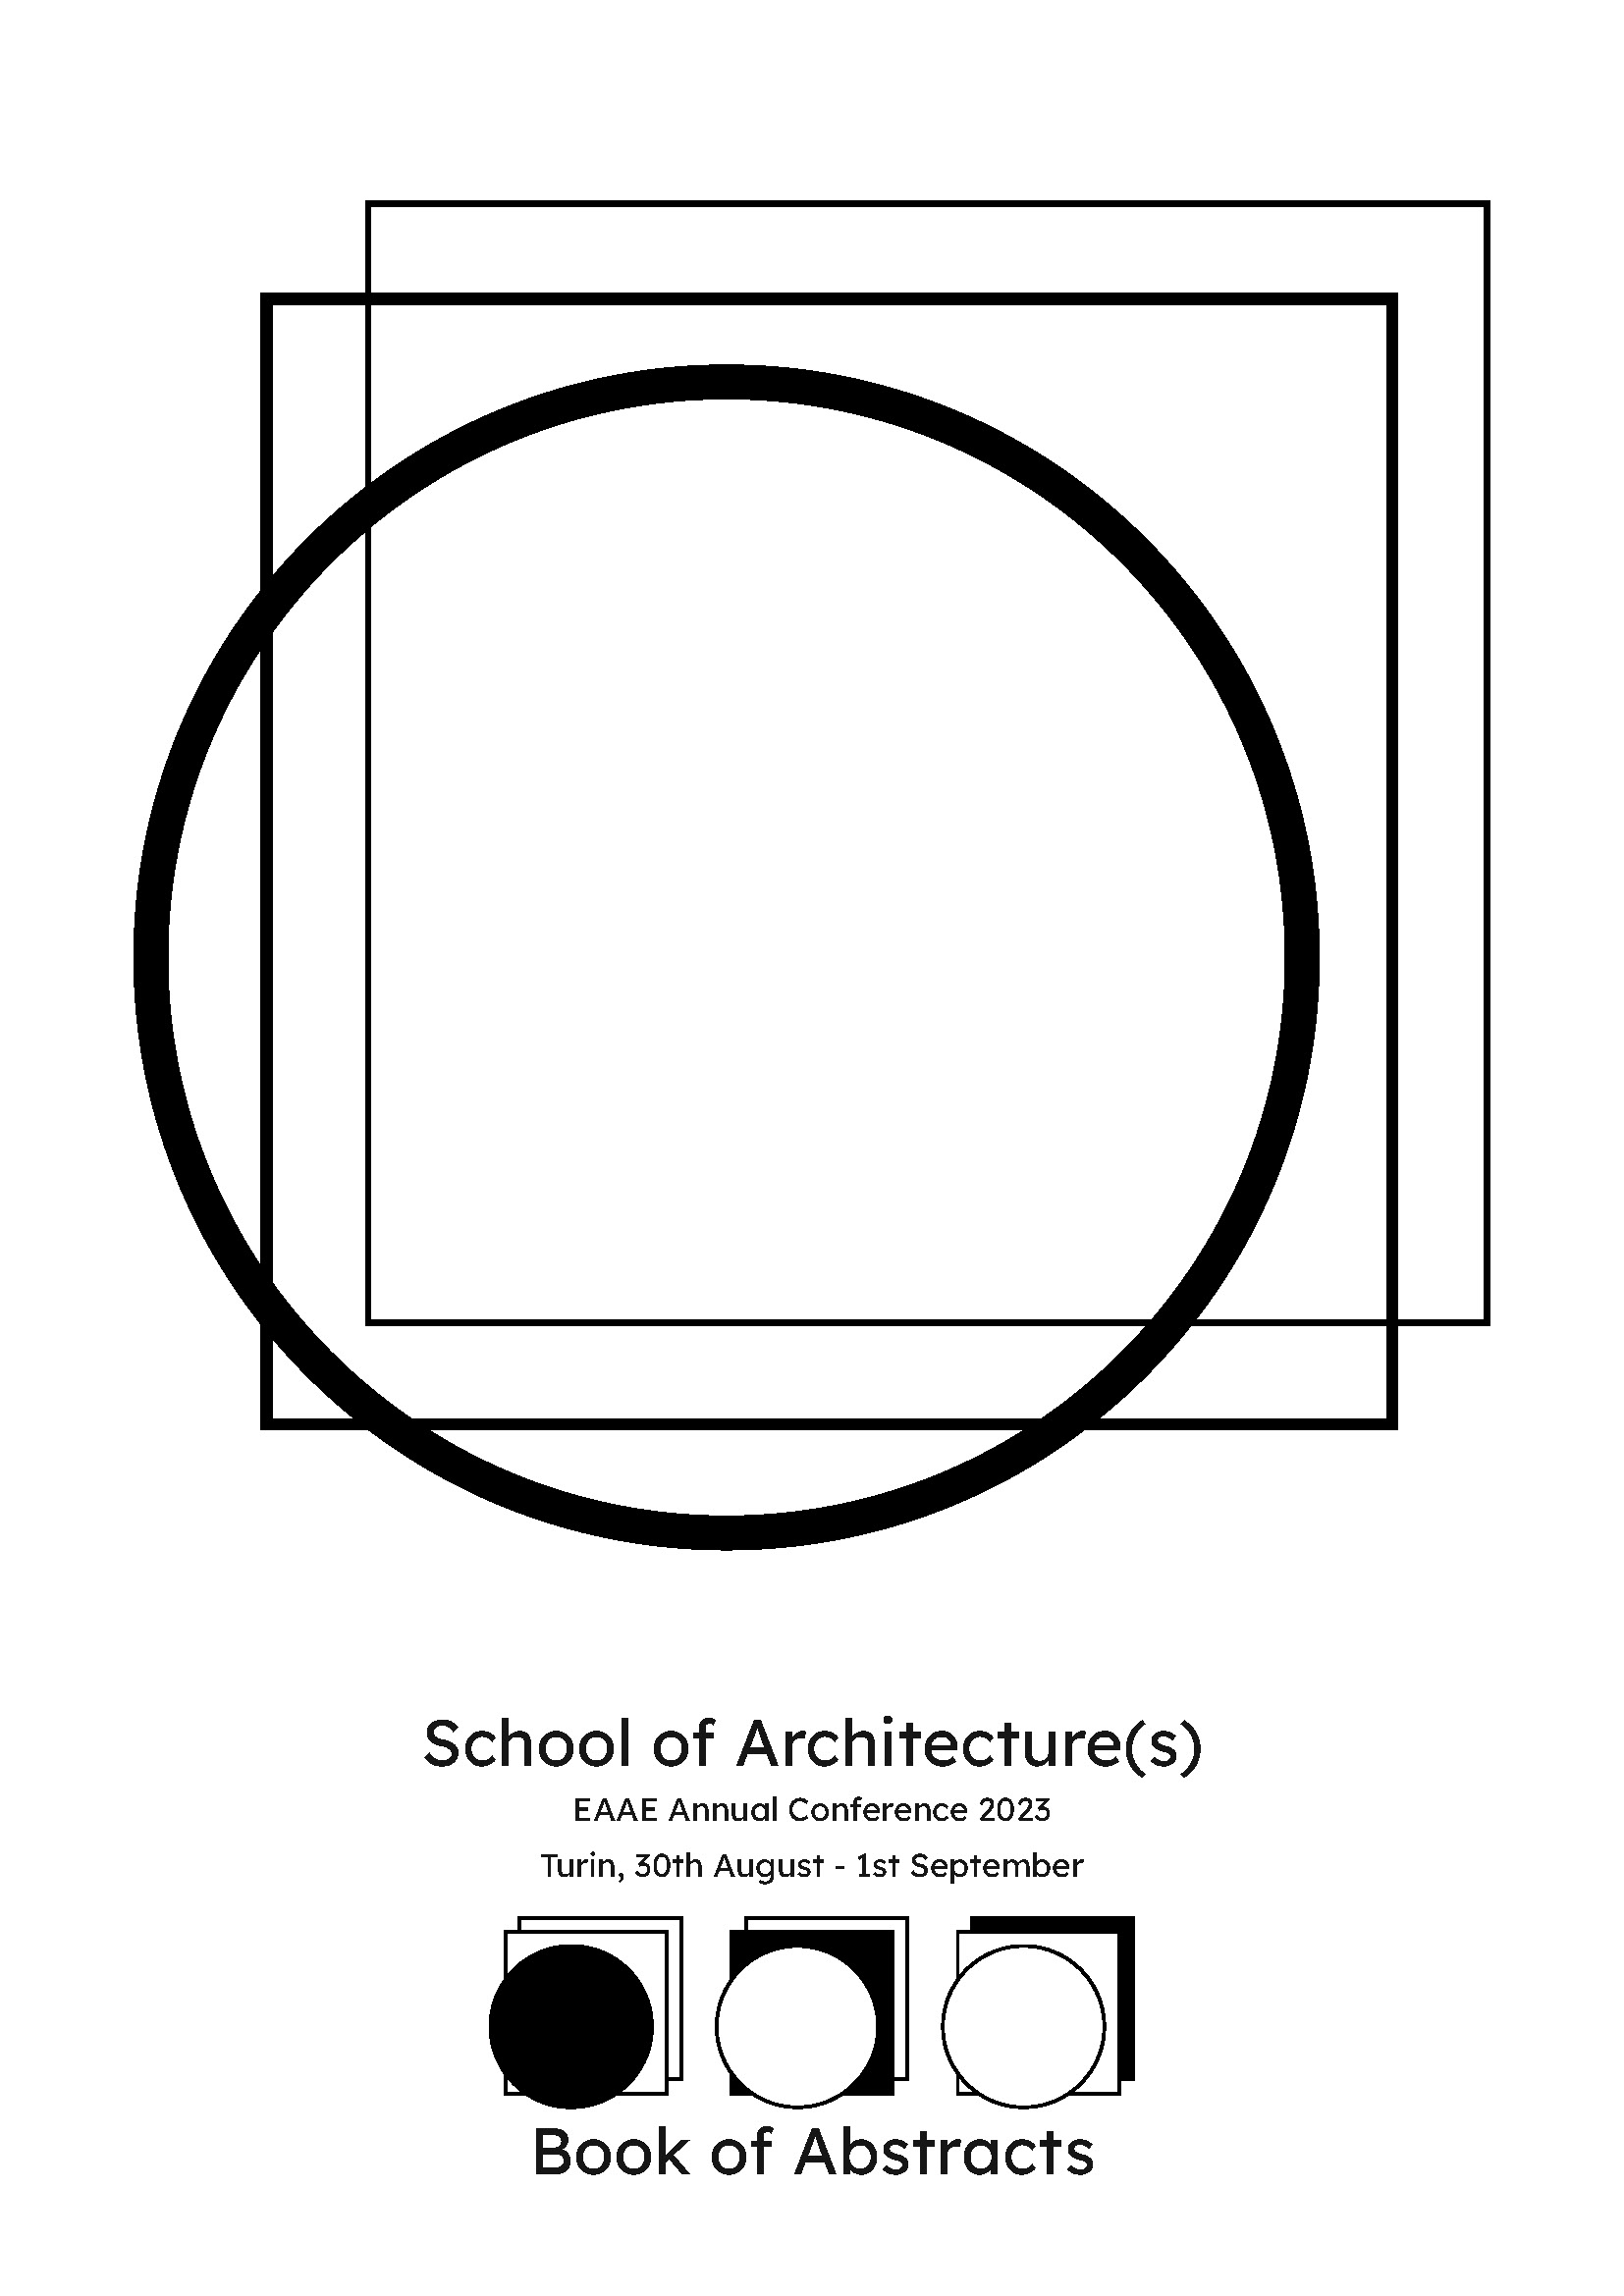 						View 2023: School of Architecture(s) - EAAE Annual Conference 2023 - Book of Abstracts
					